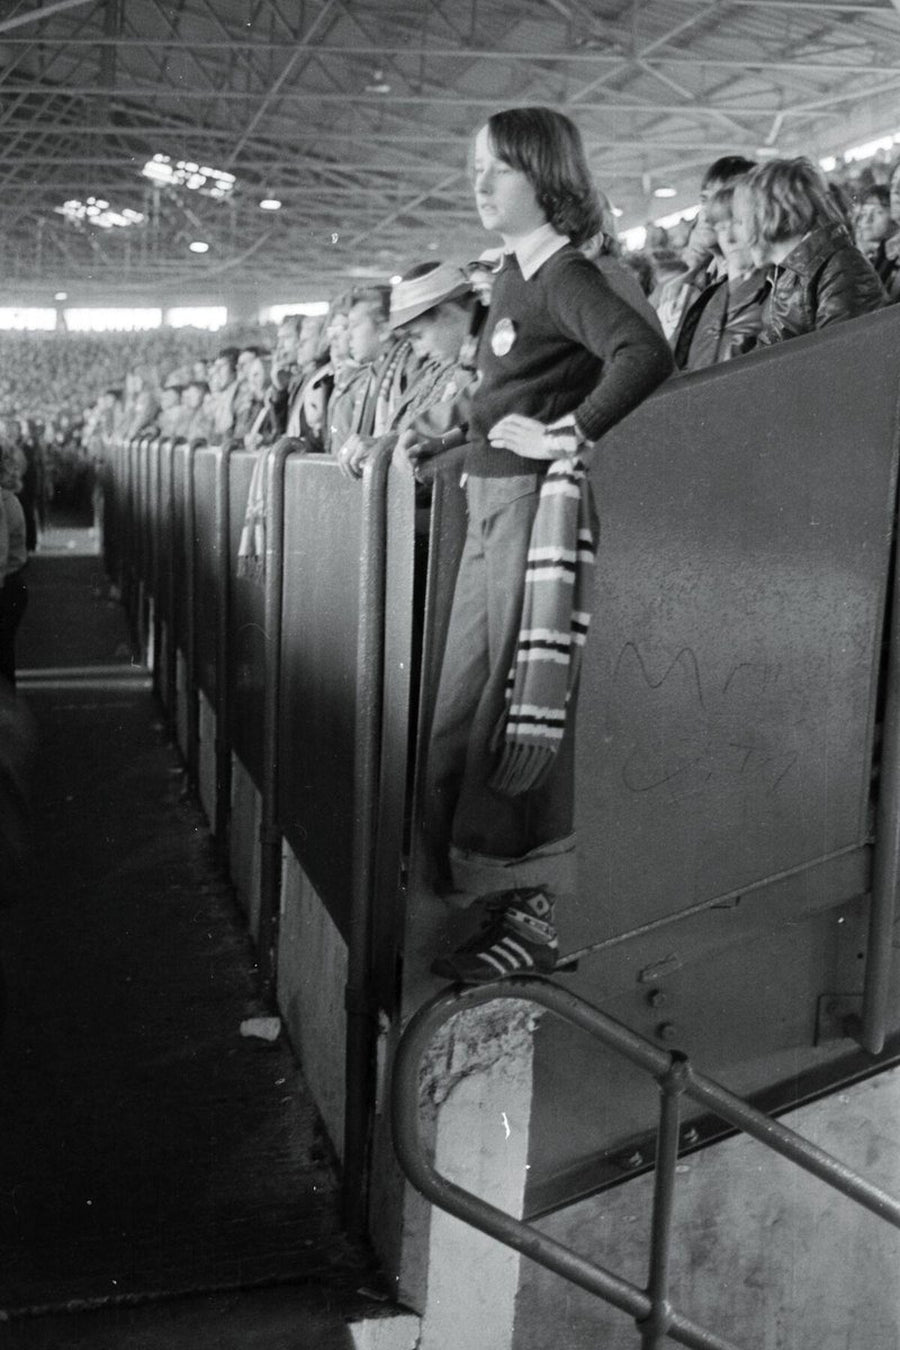 Manchester United Fans on The Terraces by Iain SP Reid - c. 1976